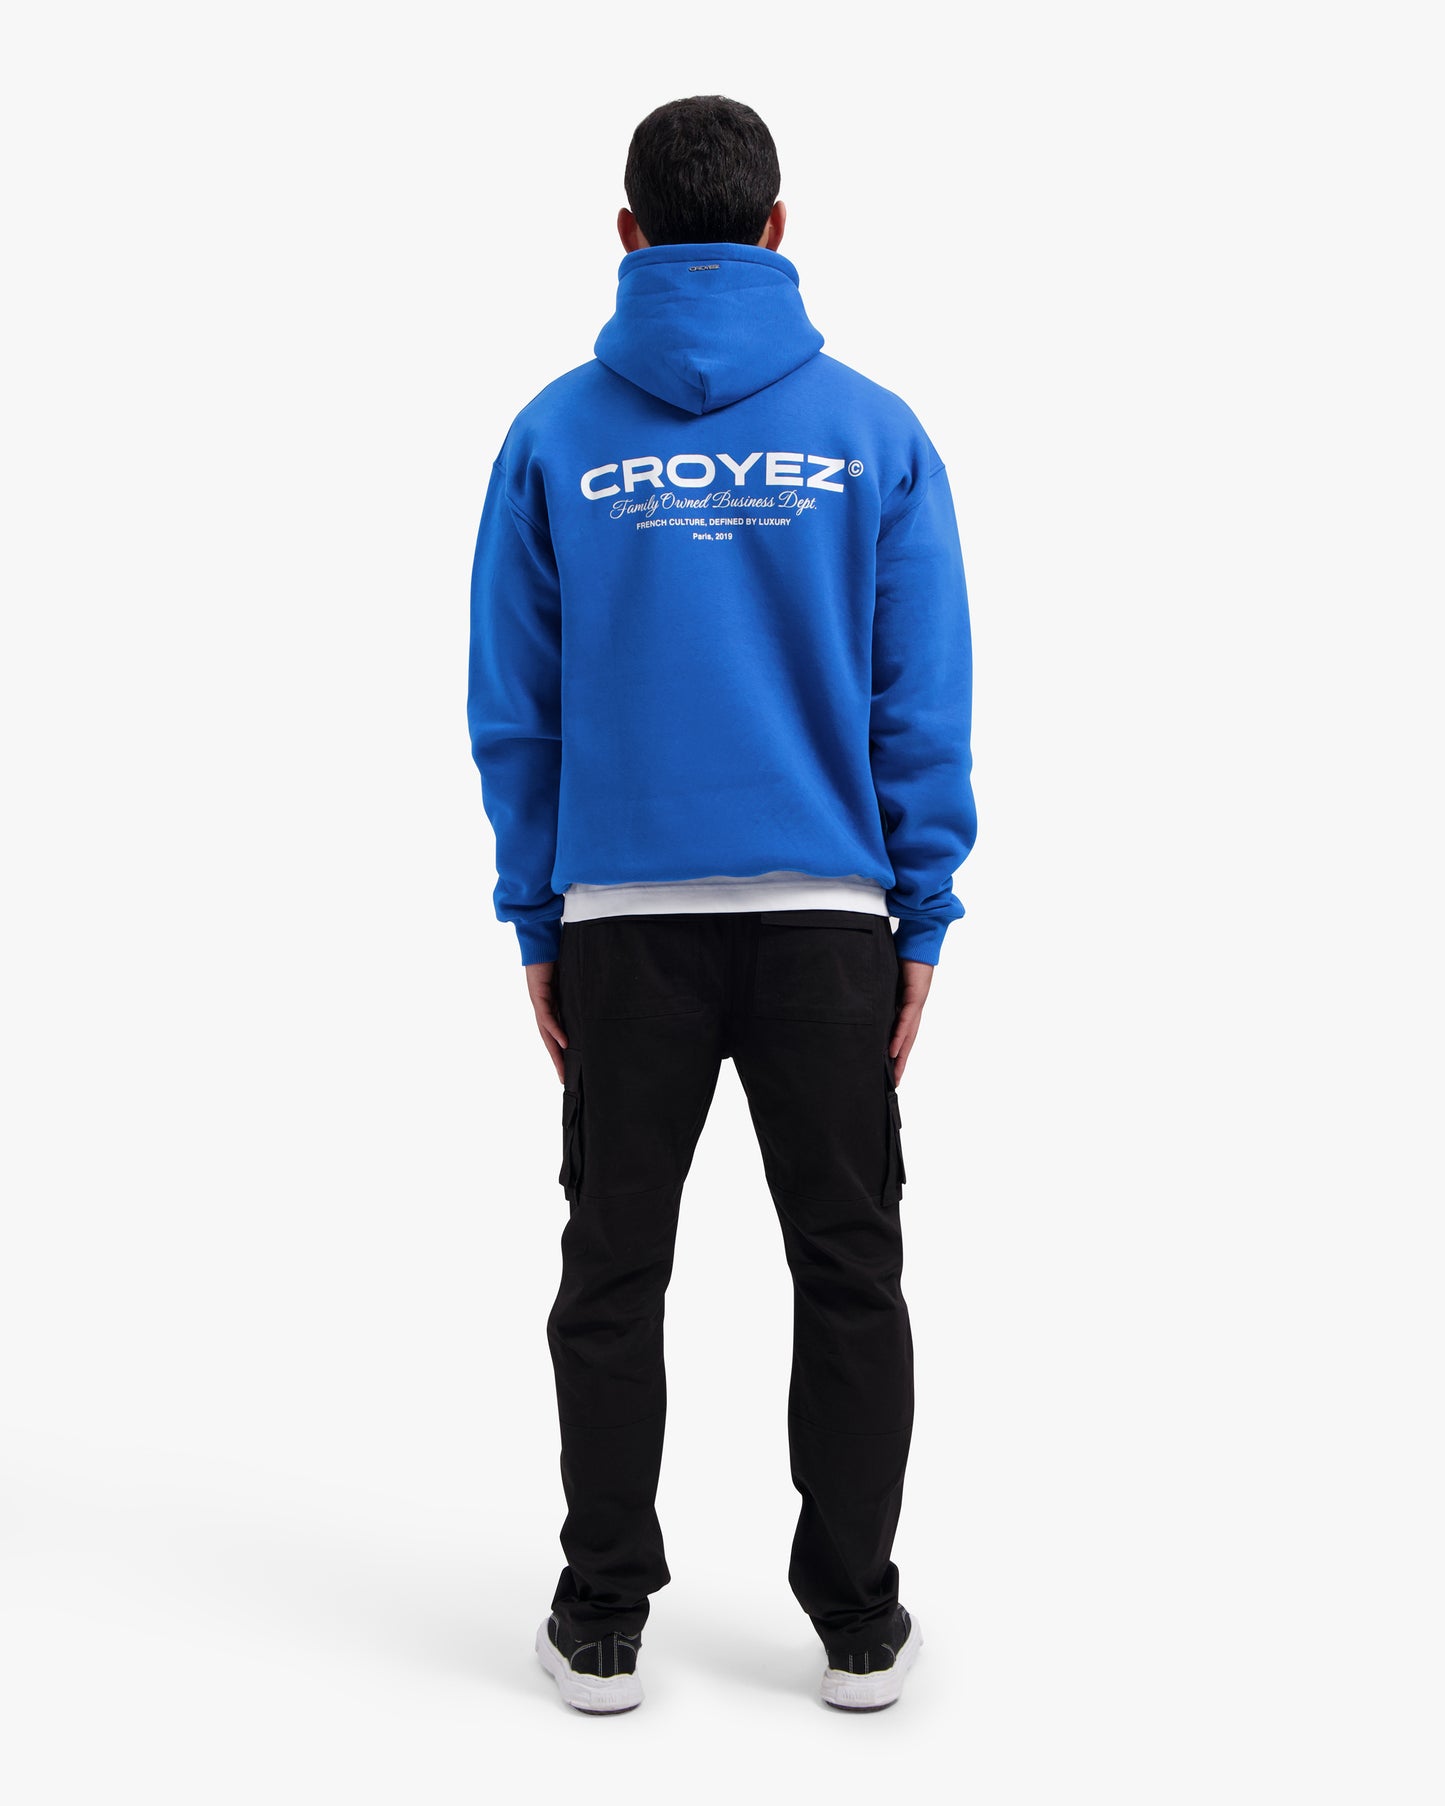 CROYEZ FAMILY OWNED BUSINESS HOODIE - ROYAL BLUE